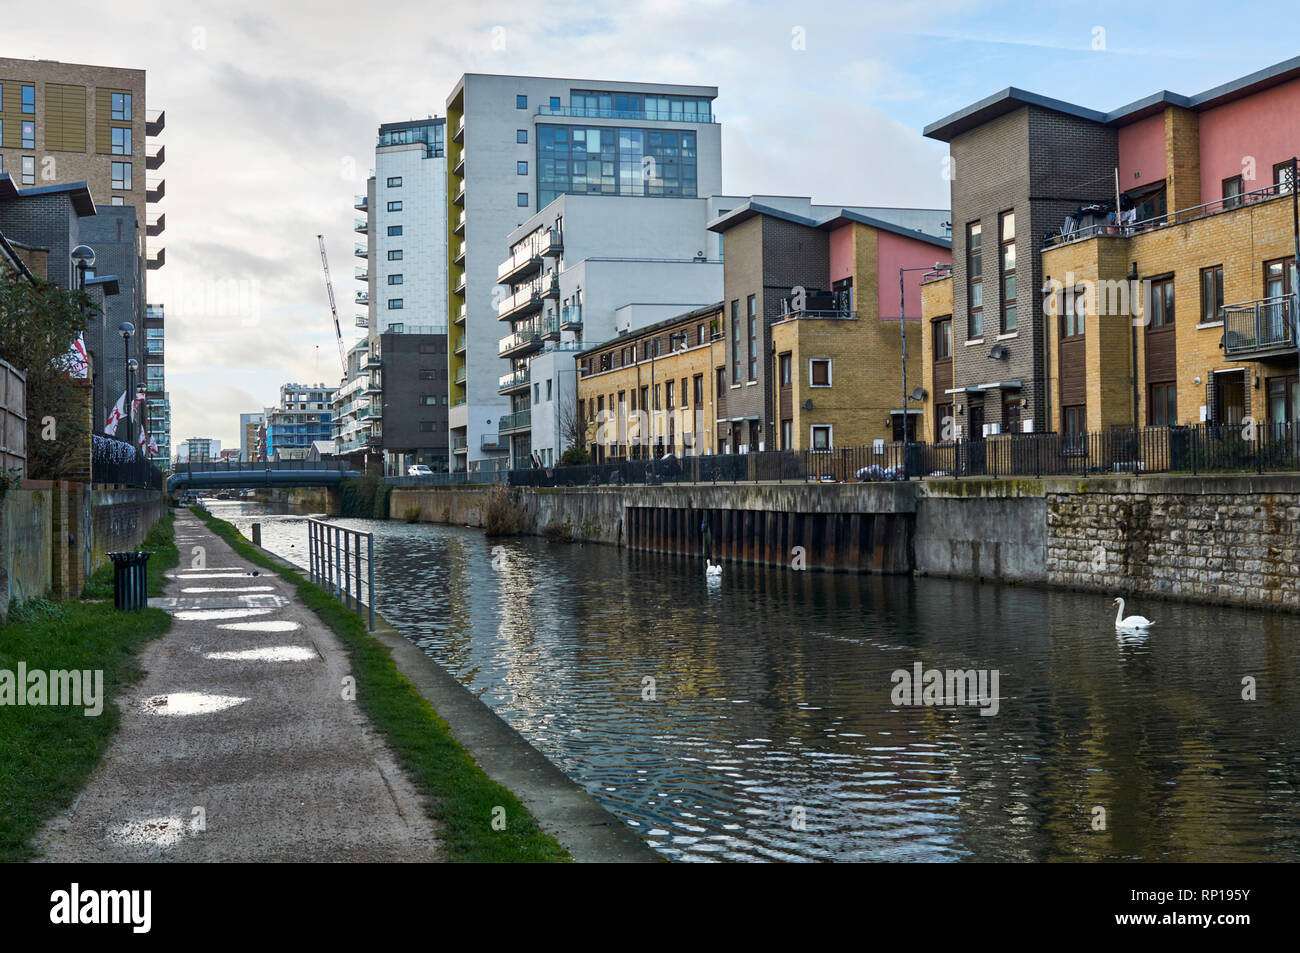 New apartments and housing along Limehouse Cut, near Limehouse, in London's East End, UK Stock Photo